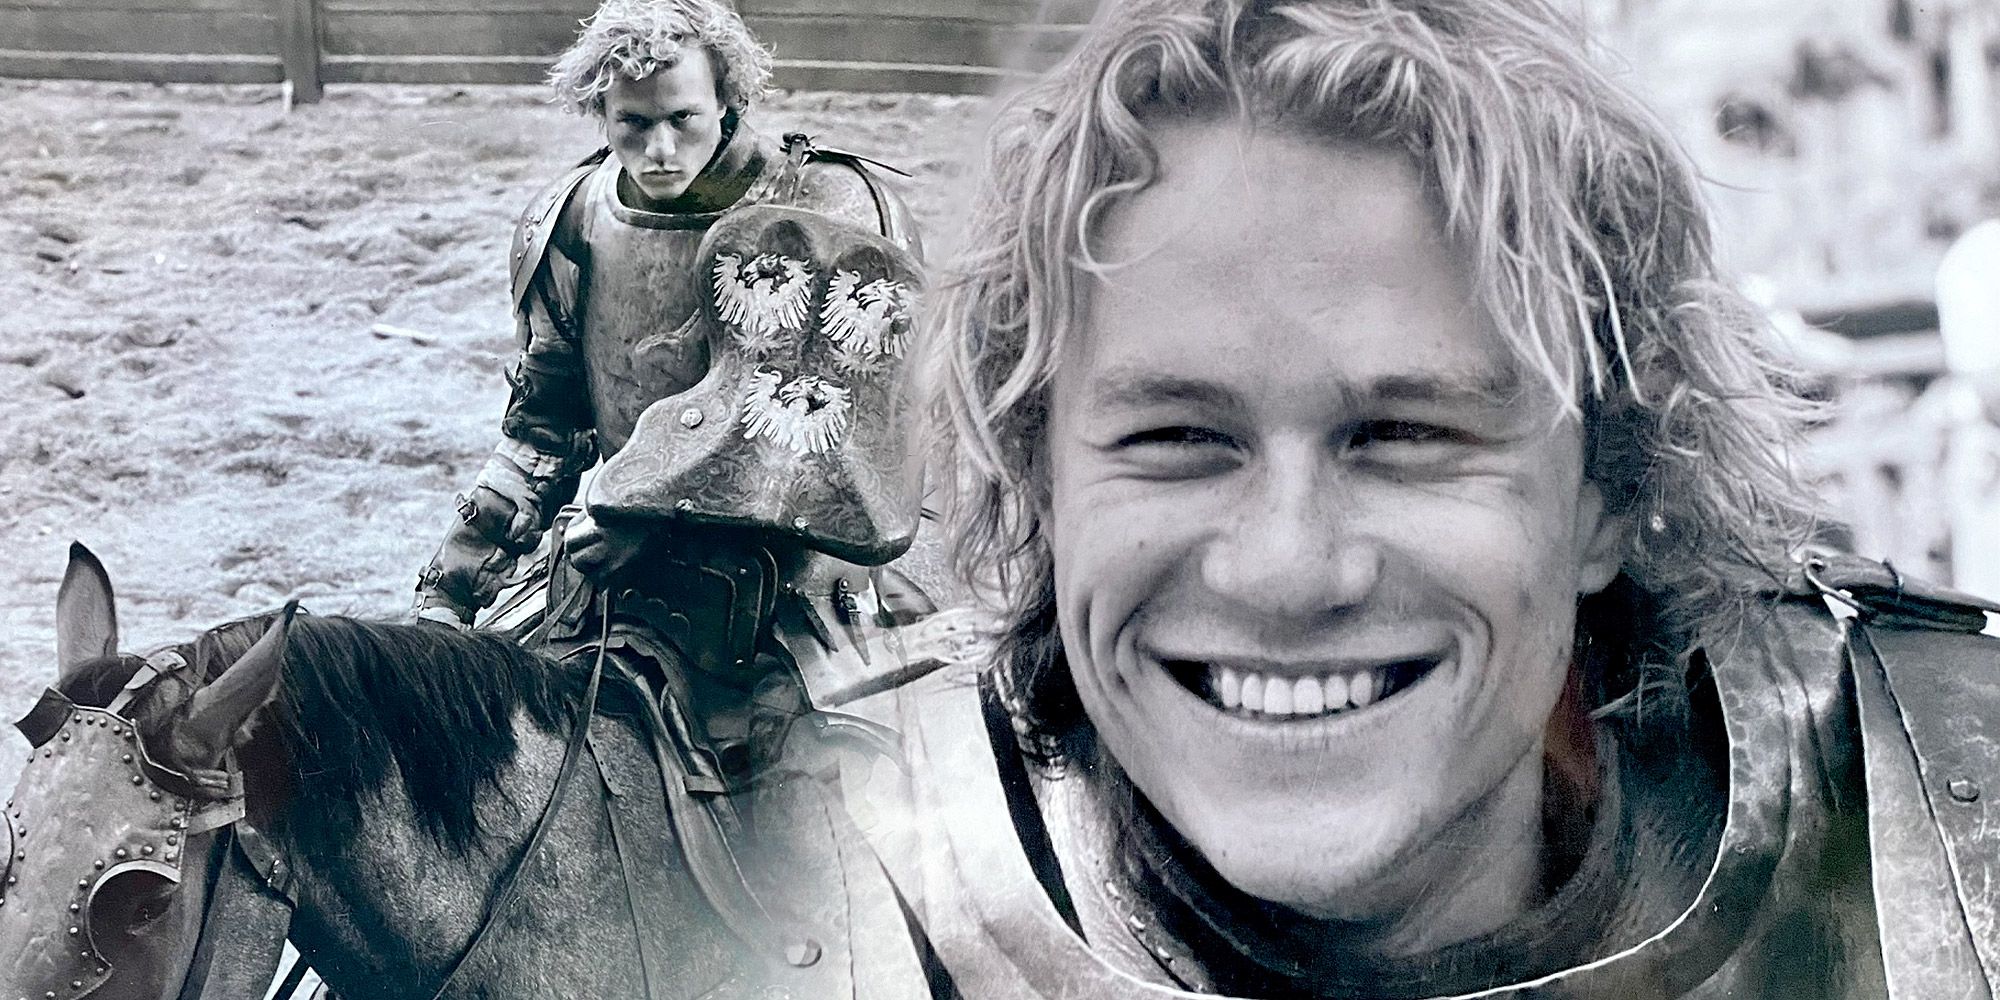 Candid photos of Heath Ledger from A Knight's Tale